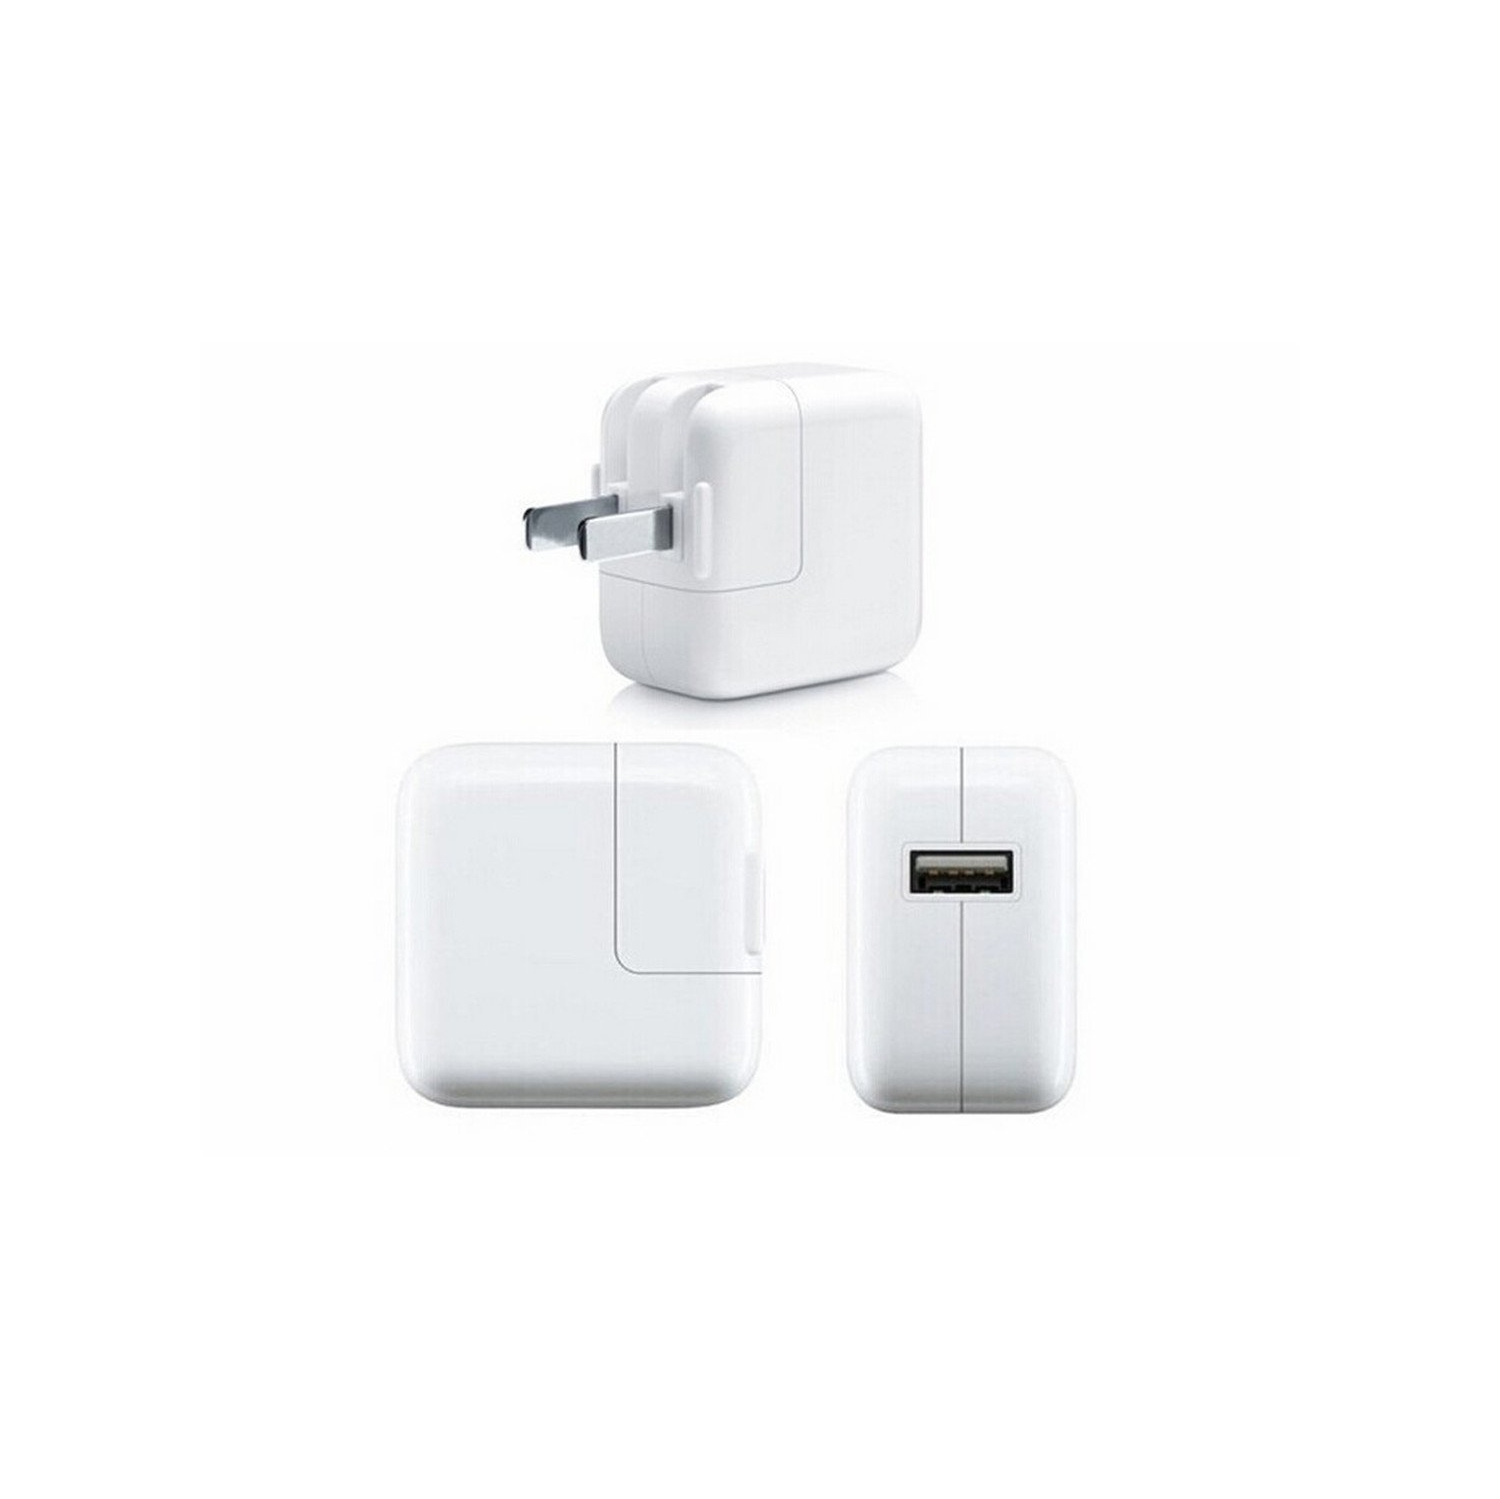 12W AC USB Power Wall Plug Charger Travel Adapter Cube for iPhone iPad Mini Air Pro iPod Models